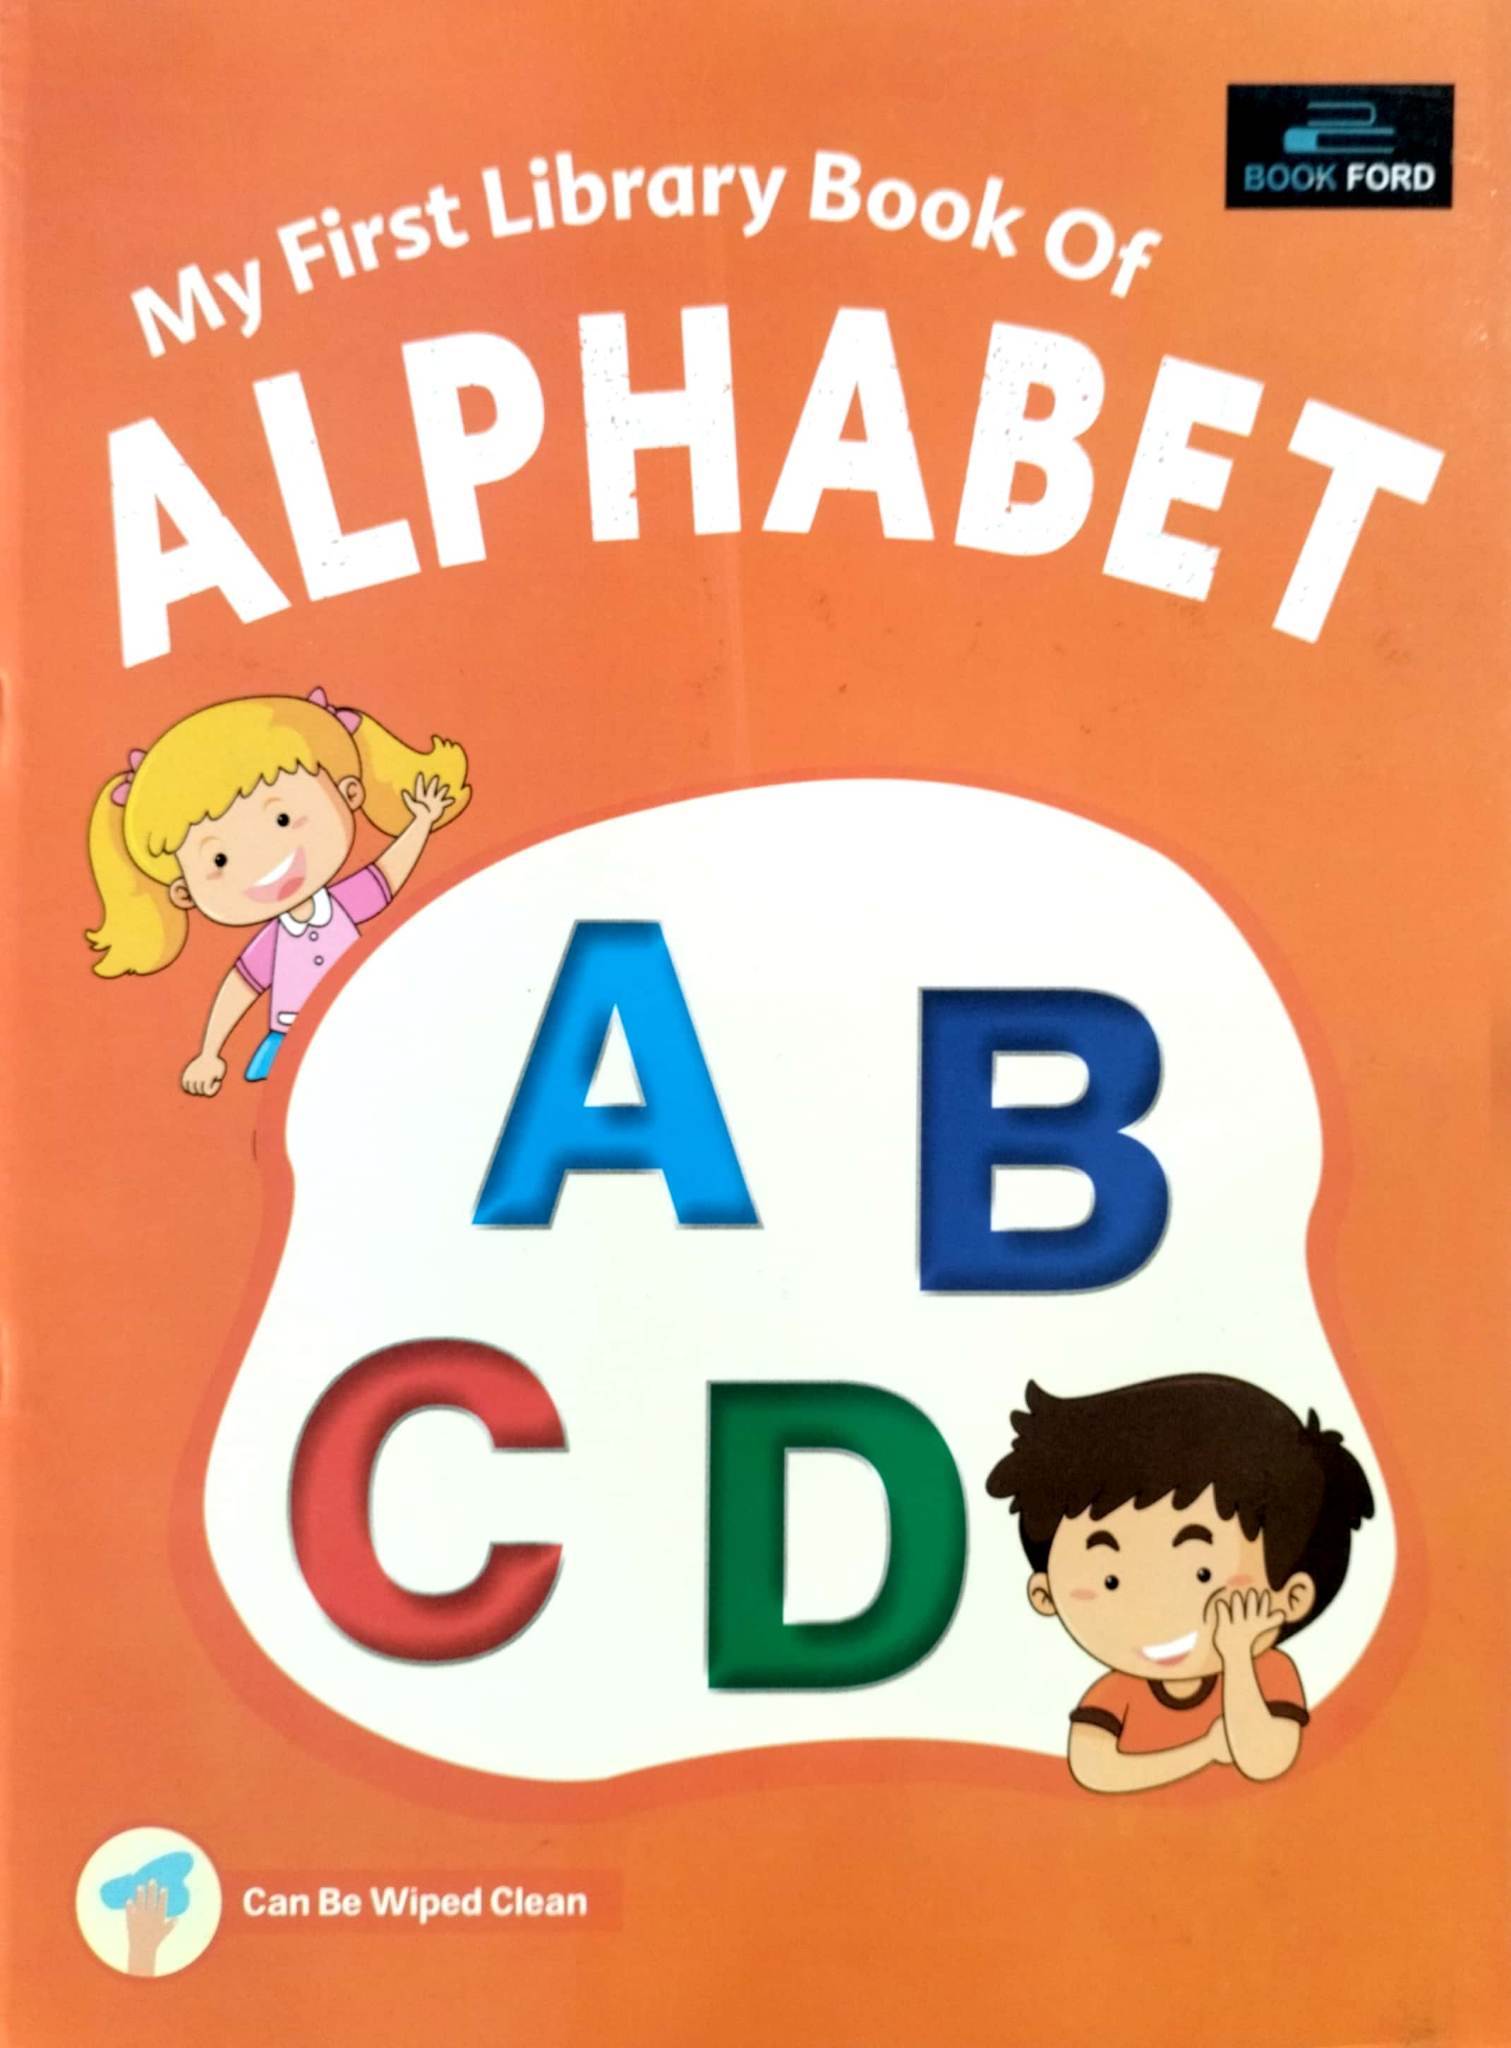 My First Library Book Of Alphabet ABCD (পেপারব্যাক)